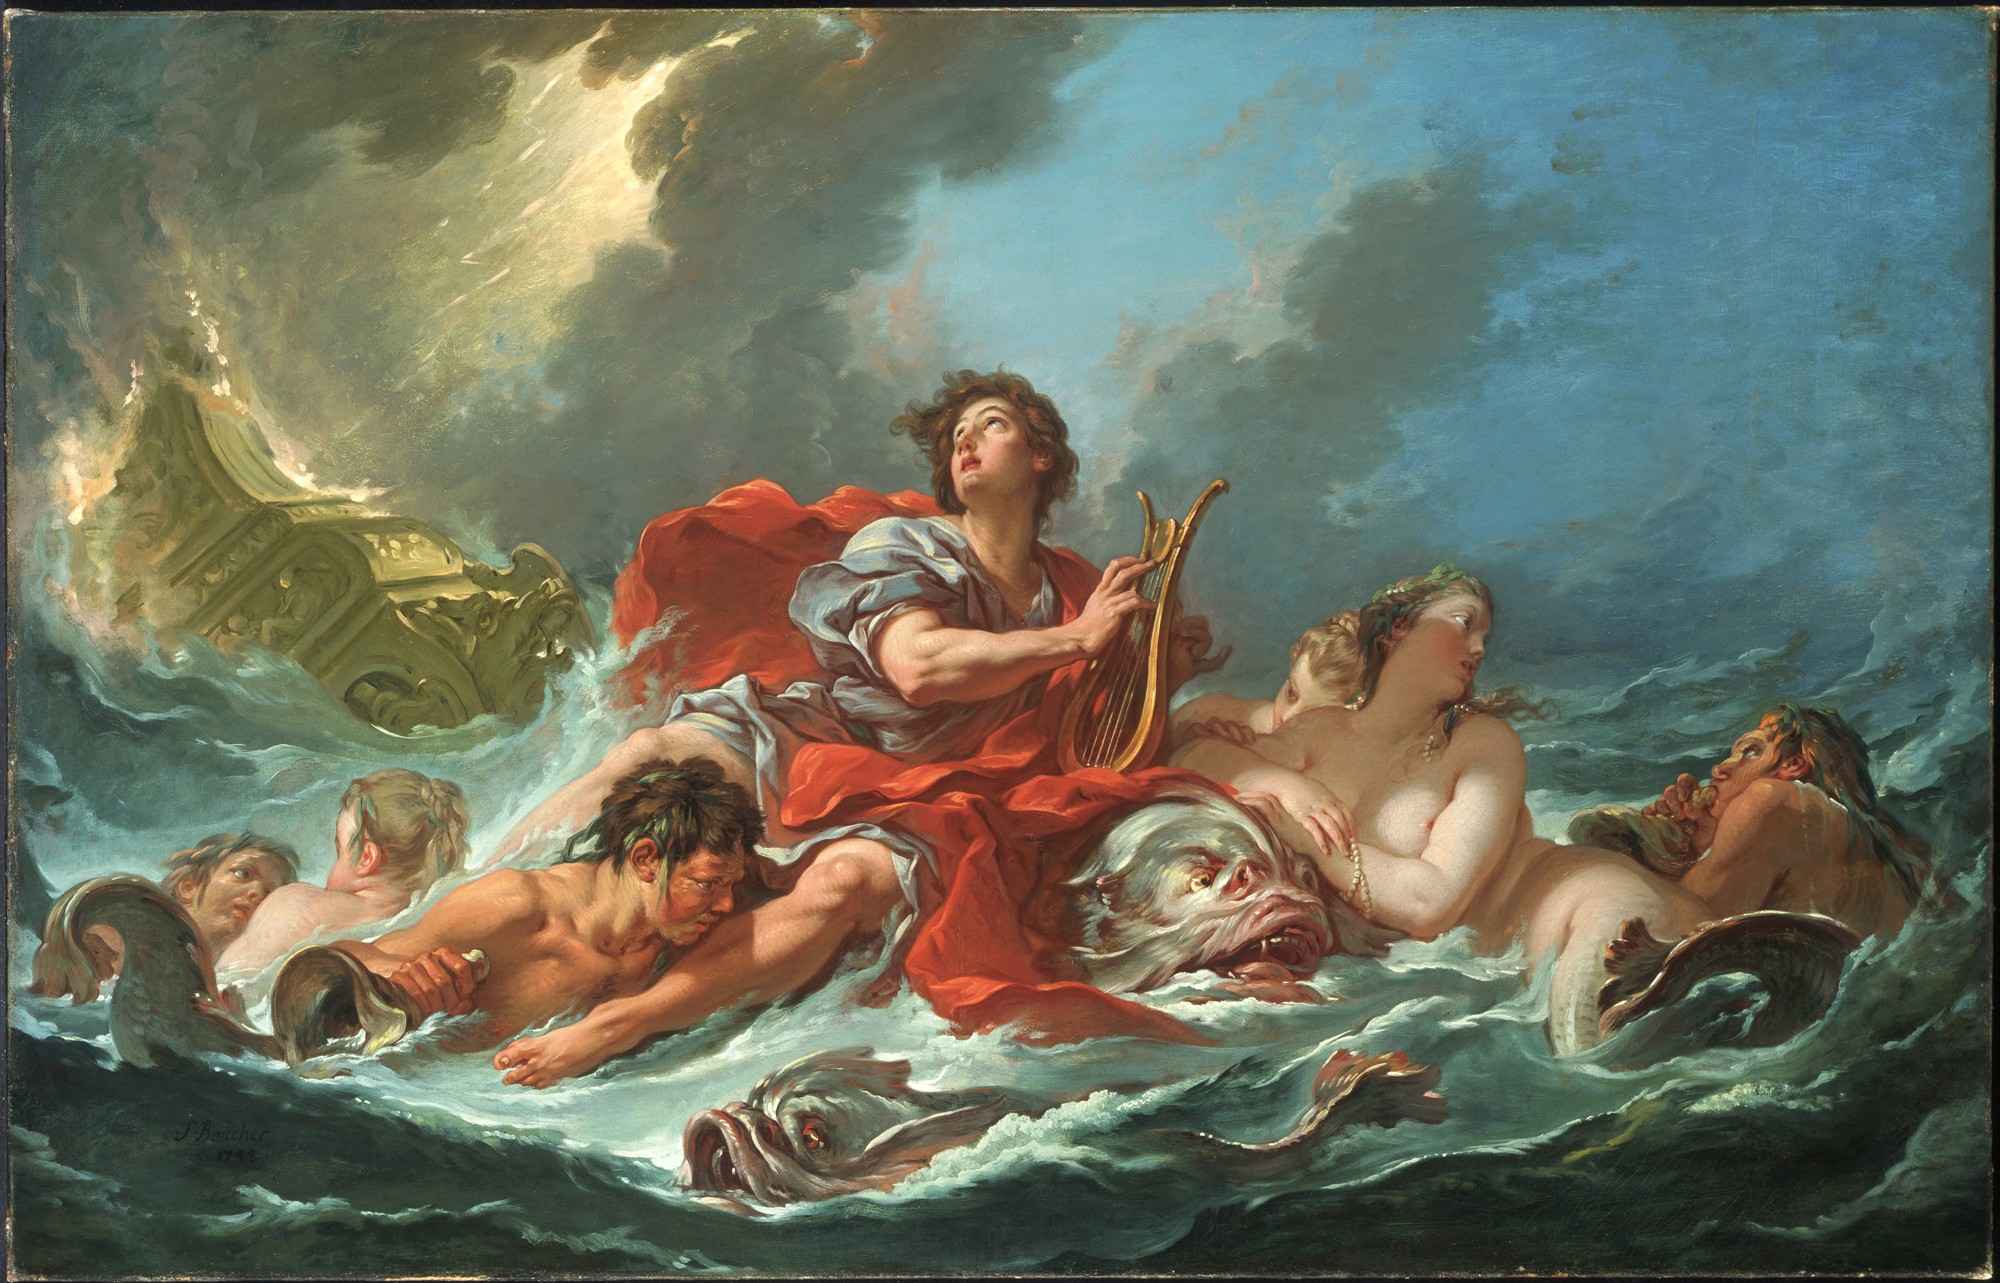 A man strumming a lyre while seated atop a sea monster with others in a stormy sea